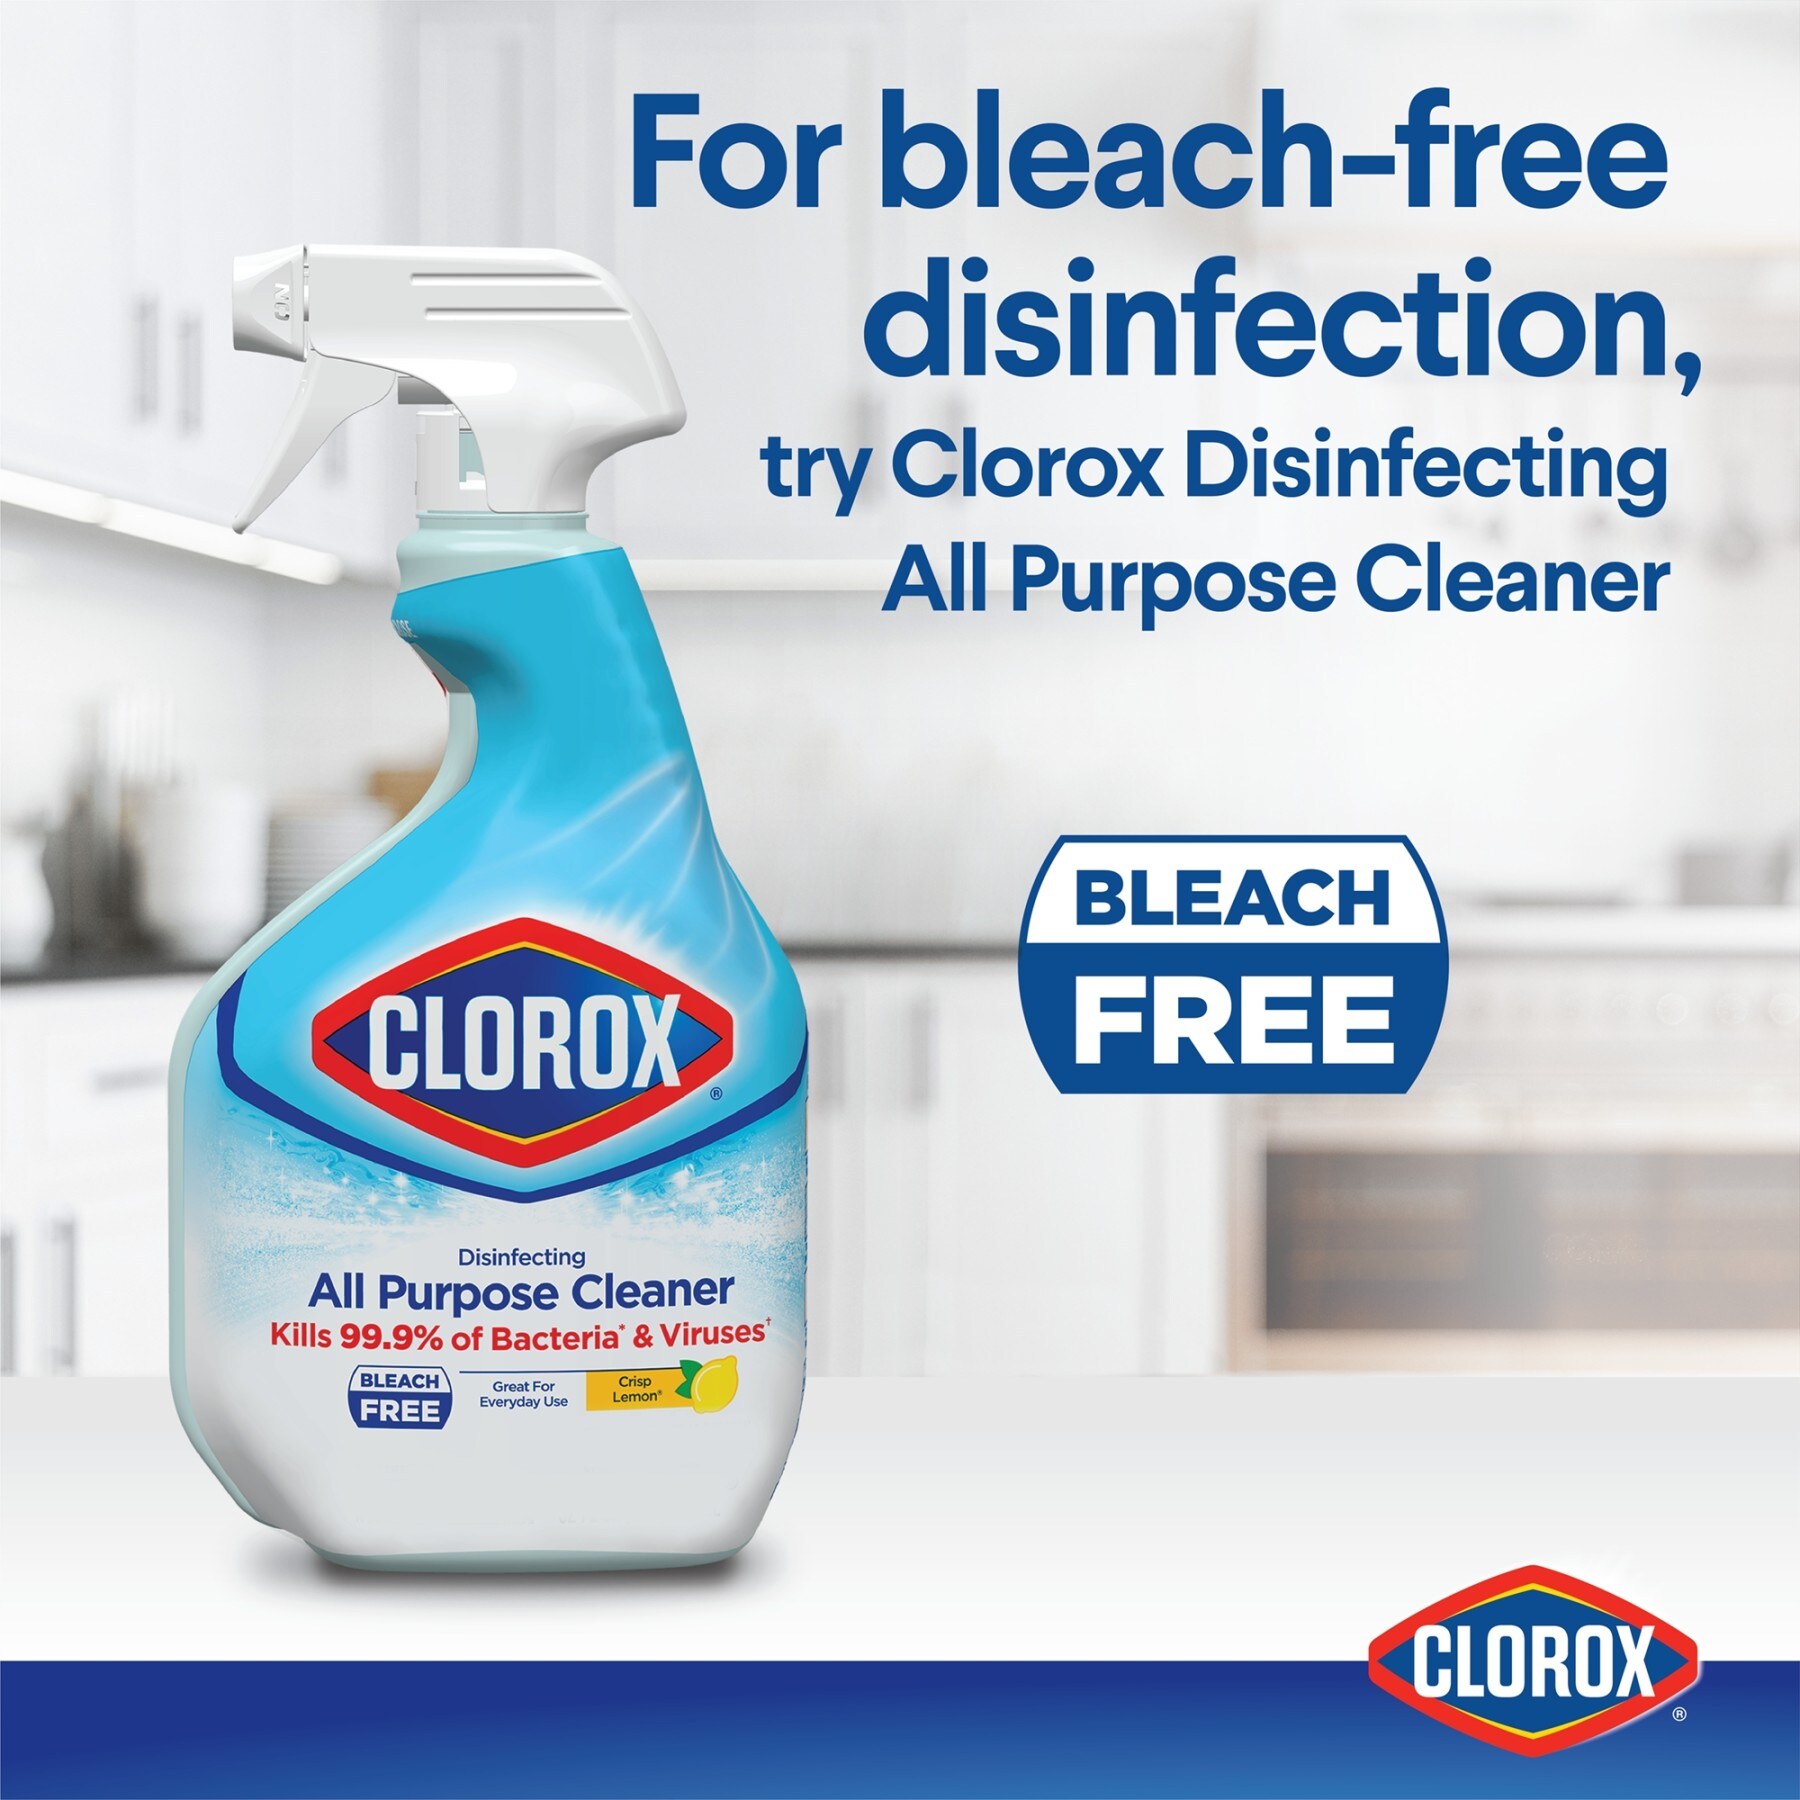 Clean-Up All Purpose Cleaner with Bleach; Spray Bottle; Fresh